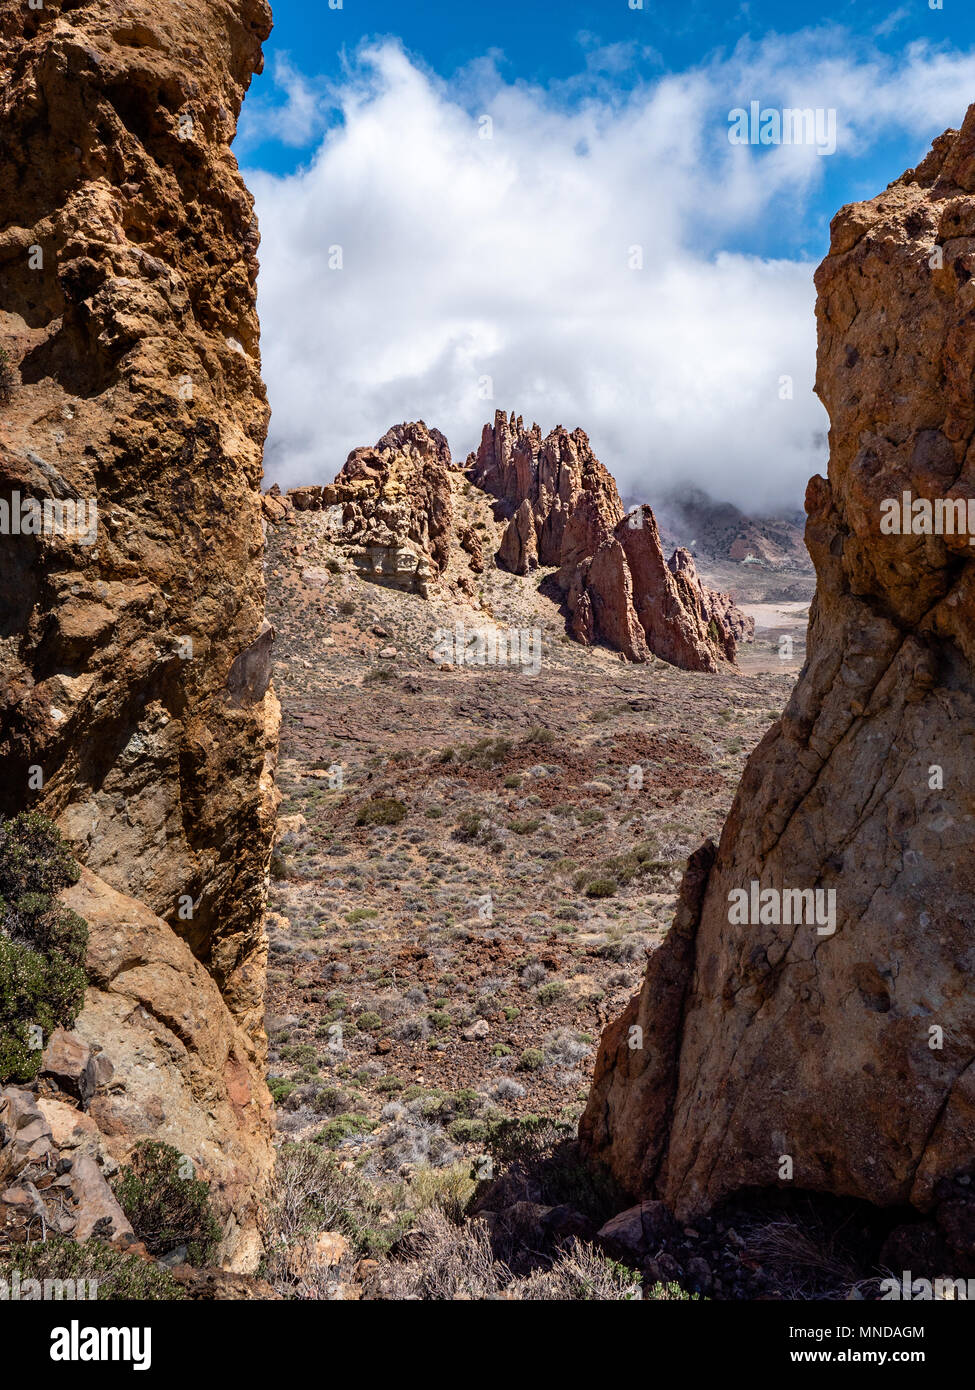 Pinnacles of the Roques de Garcia in the Las Canadas caldera of Mount Teide on Tenerife Canary Islands seen through a cleft in breccia cliffs Stock Photo